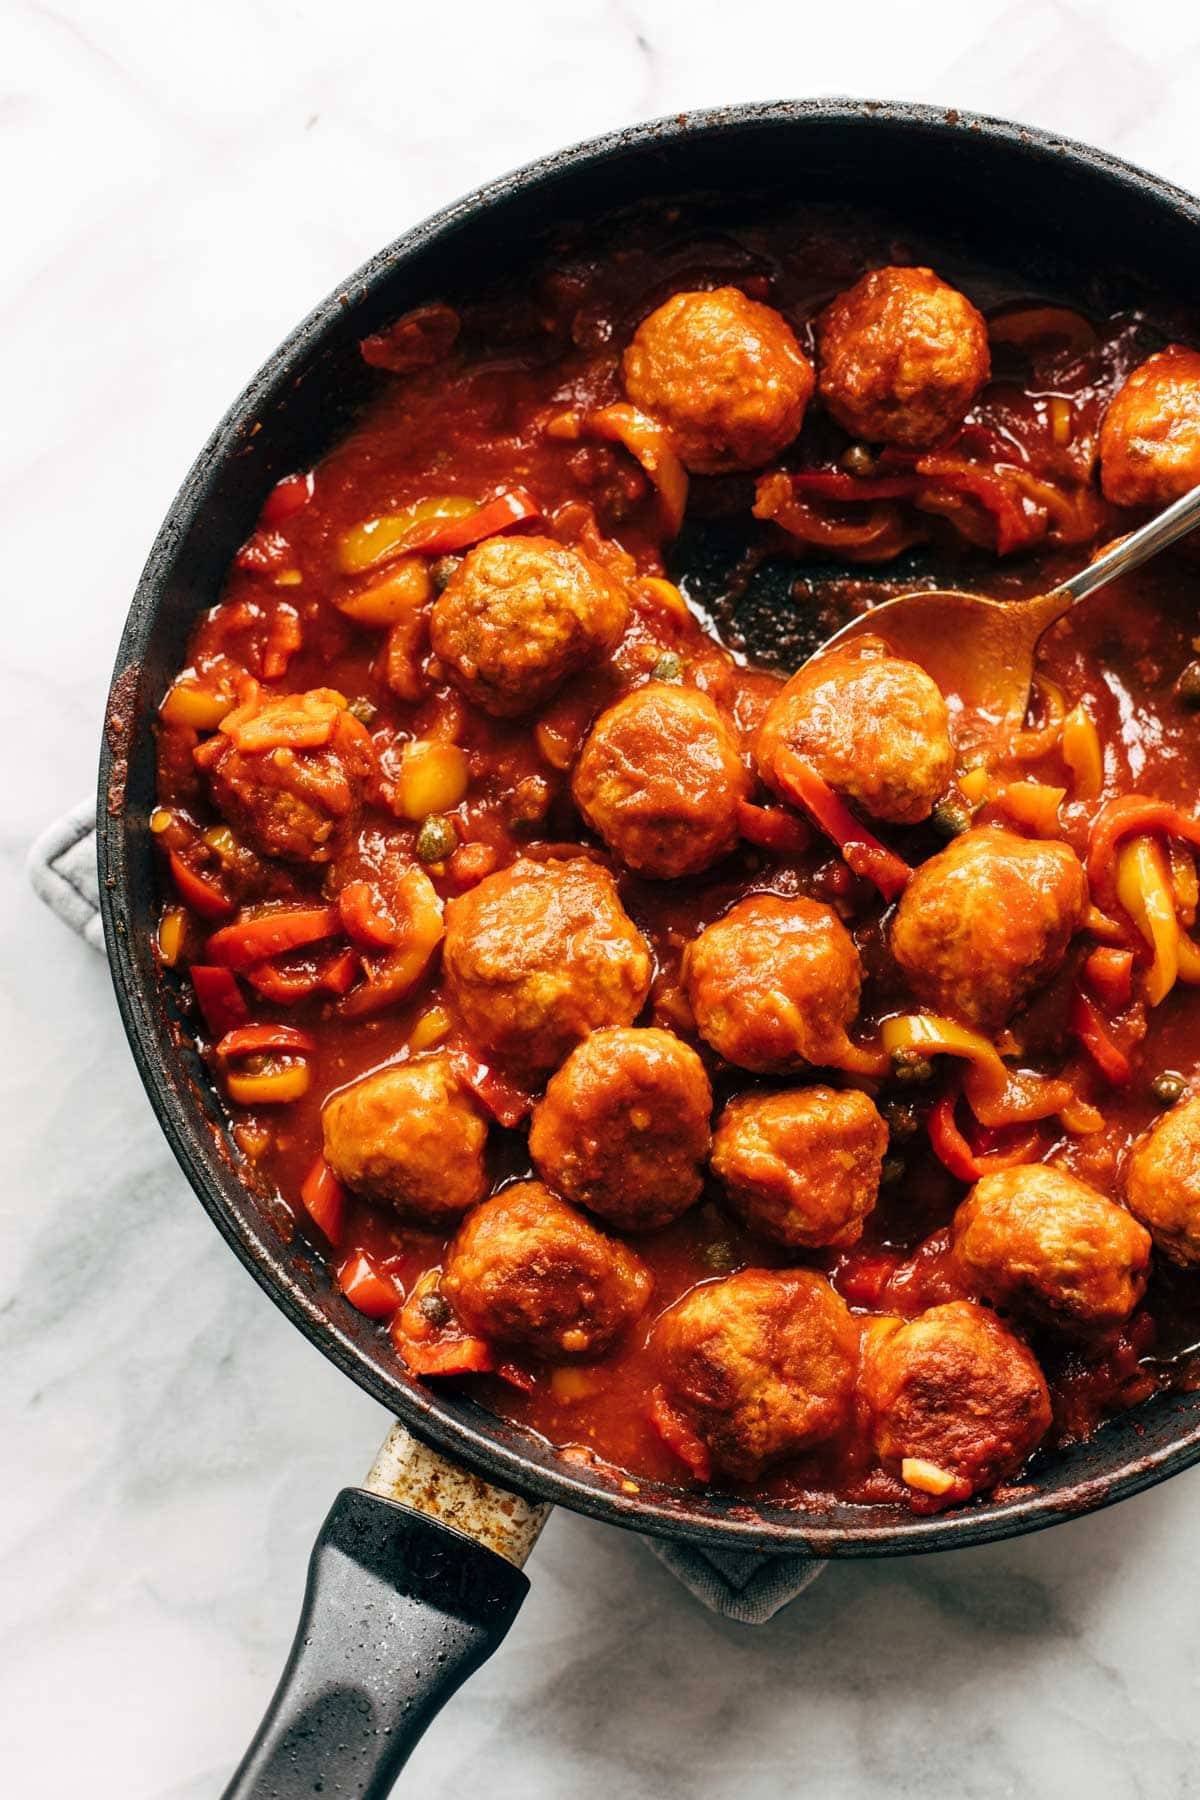 Chicken meatballs and peppers in a pan.